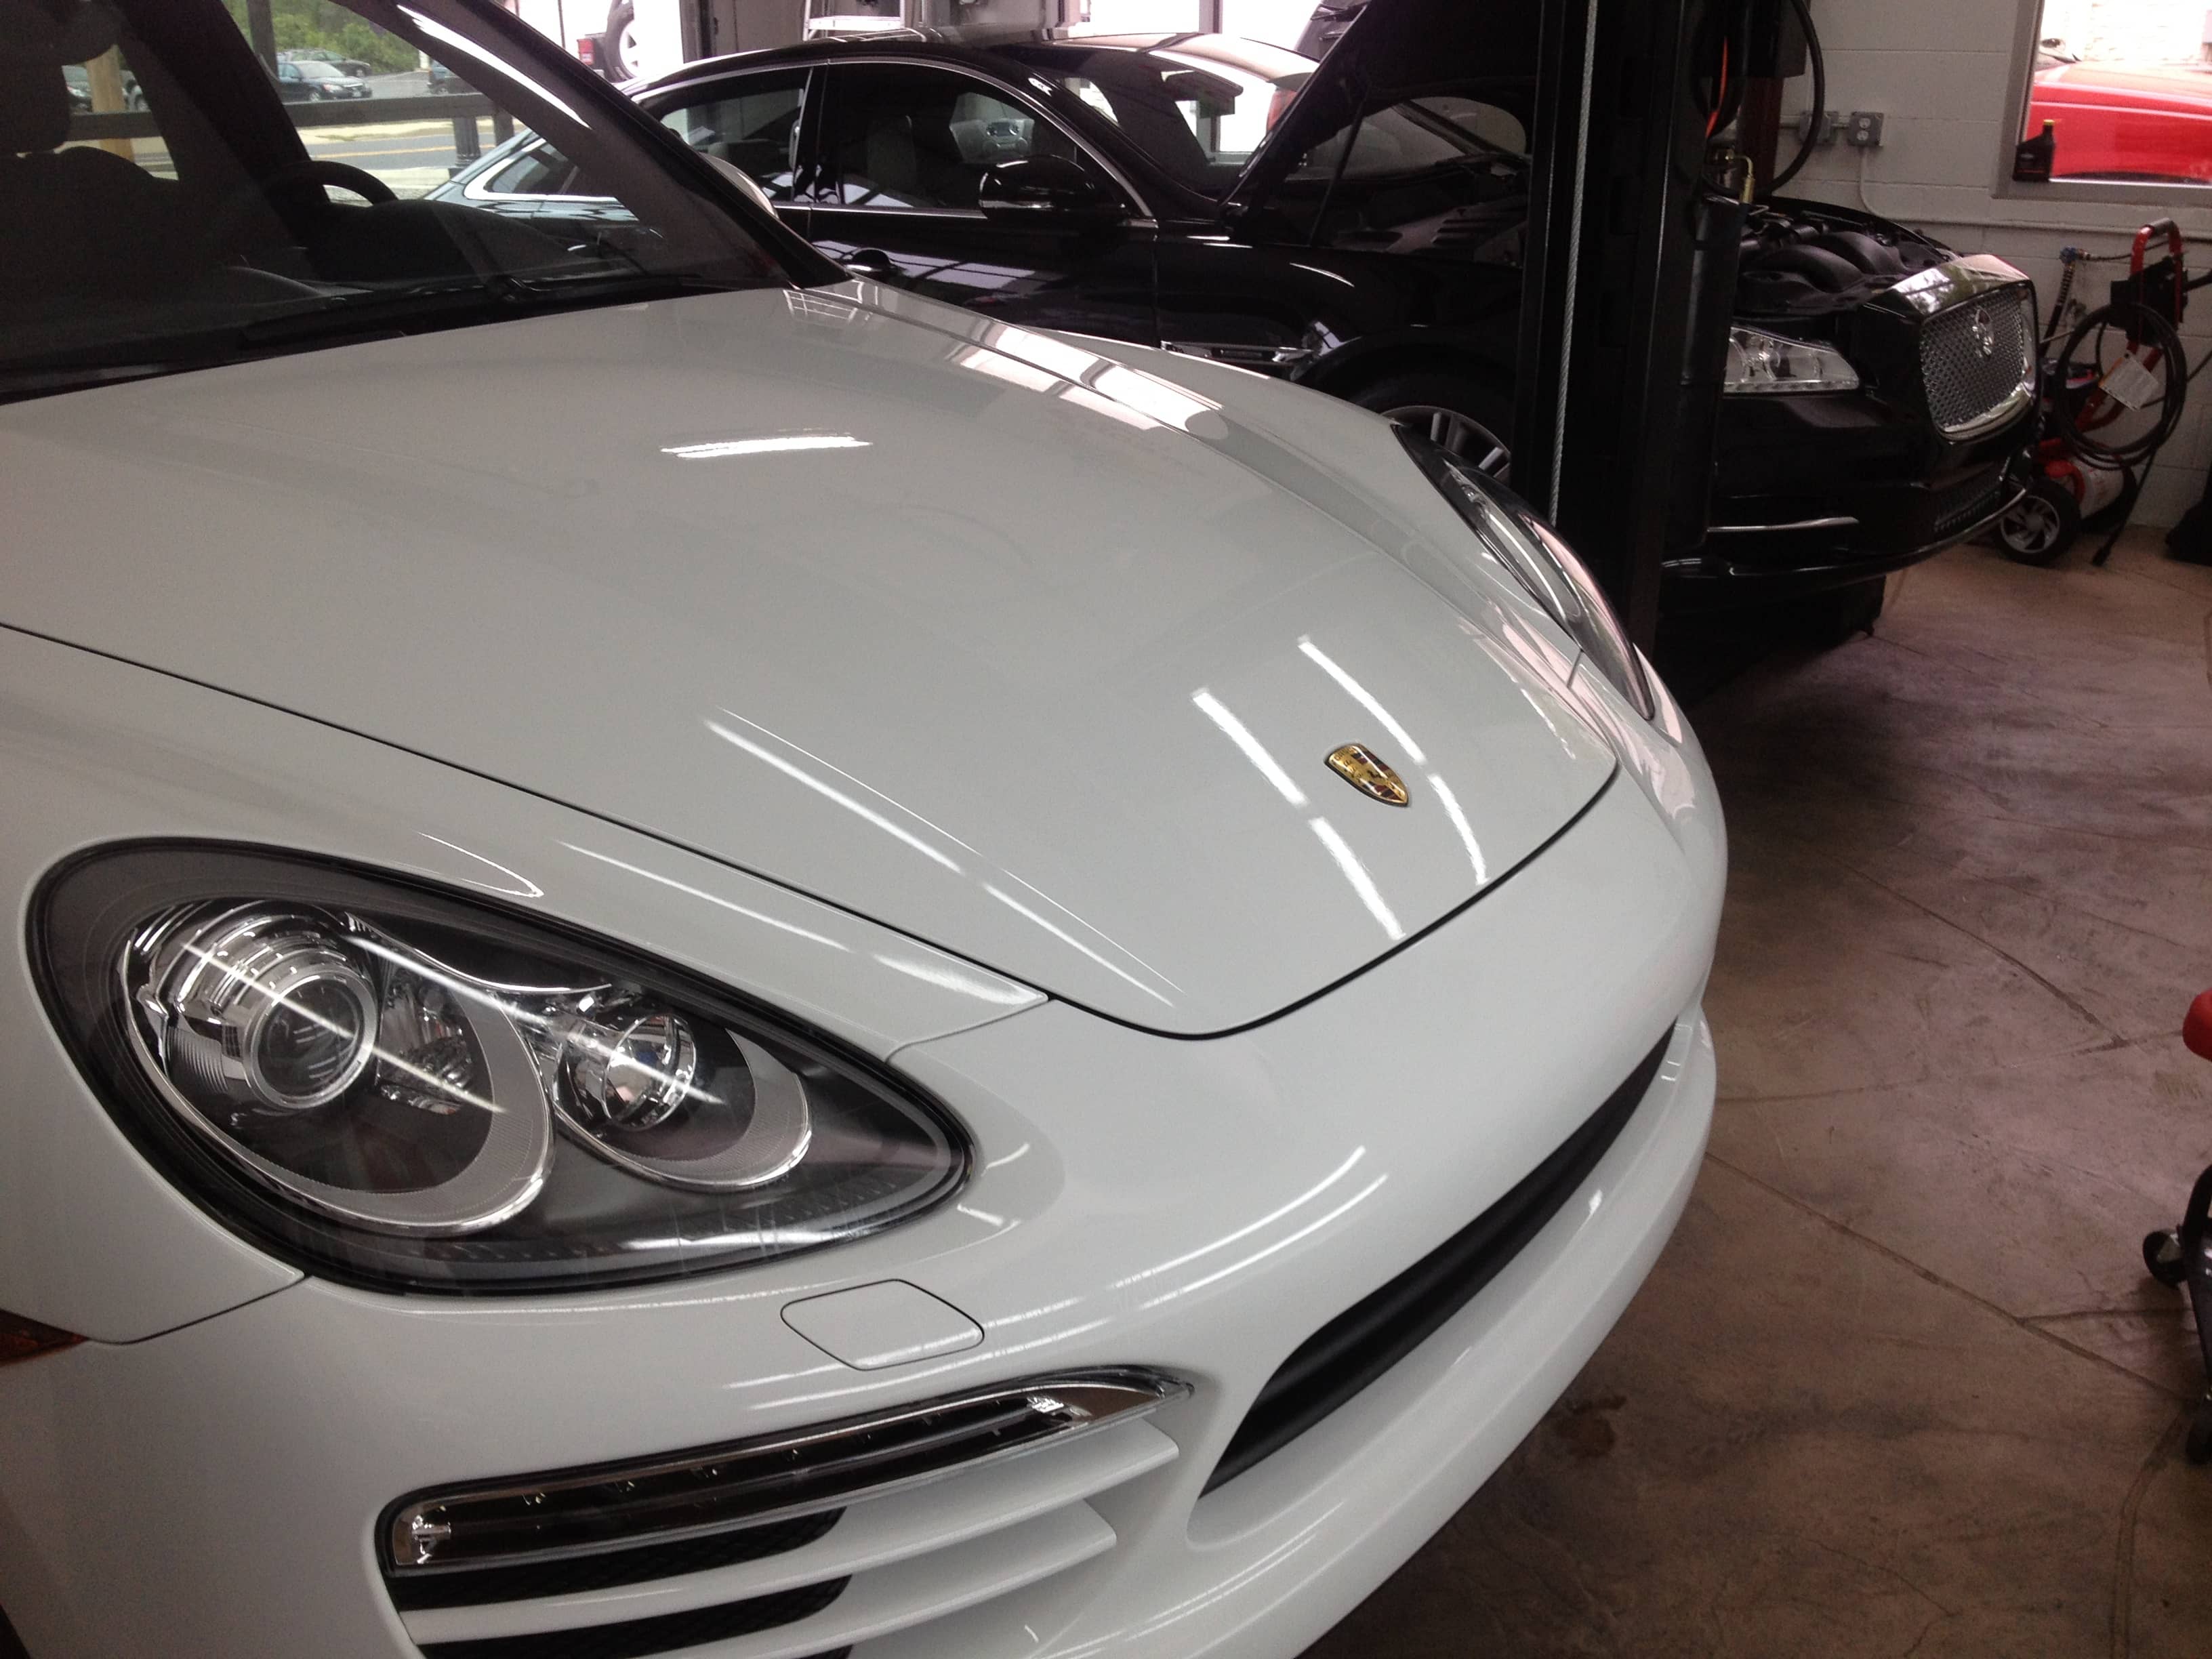 2012 Porsche Cayenne paint protection film from Xpel Ultimate Self Healing